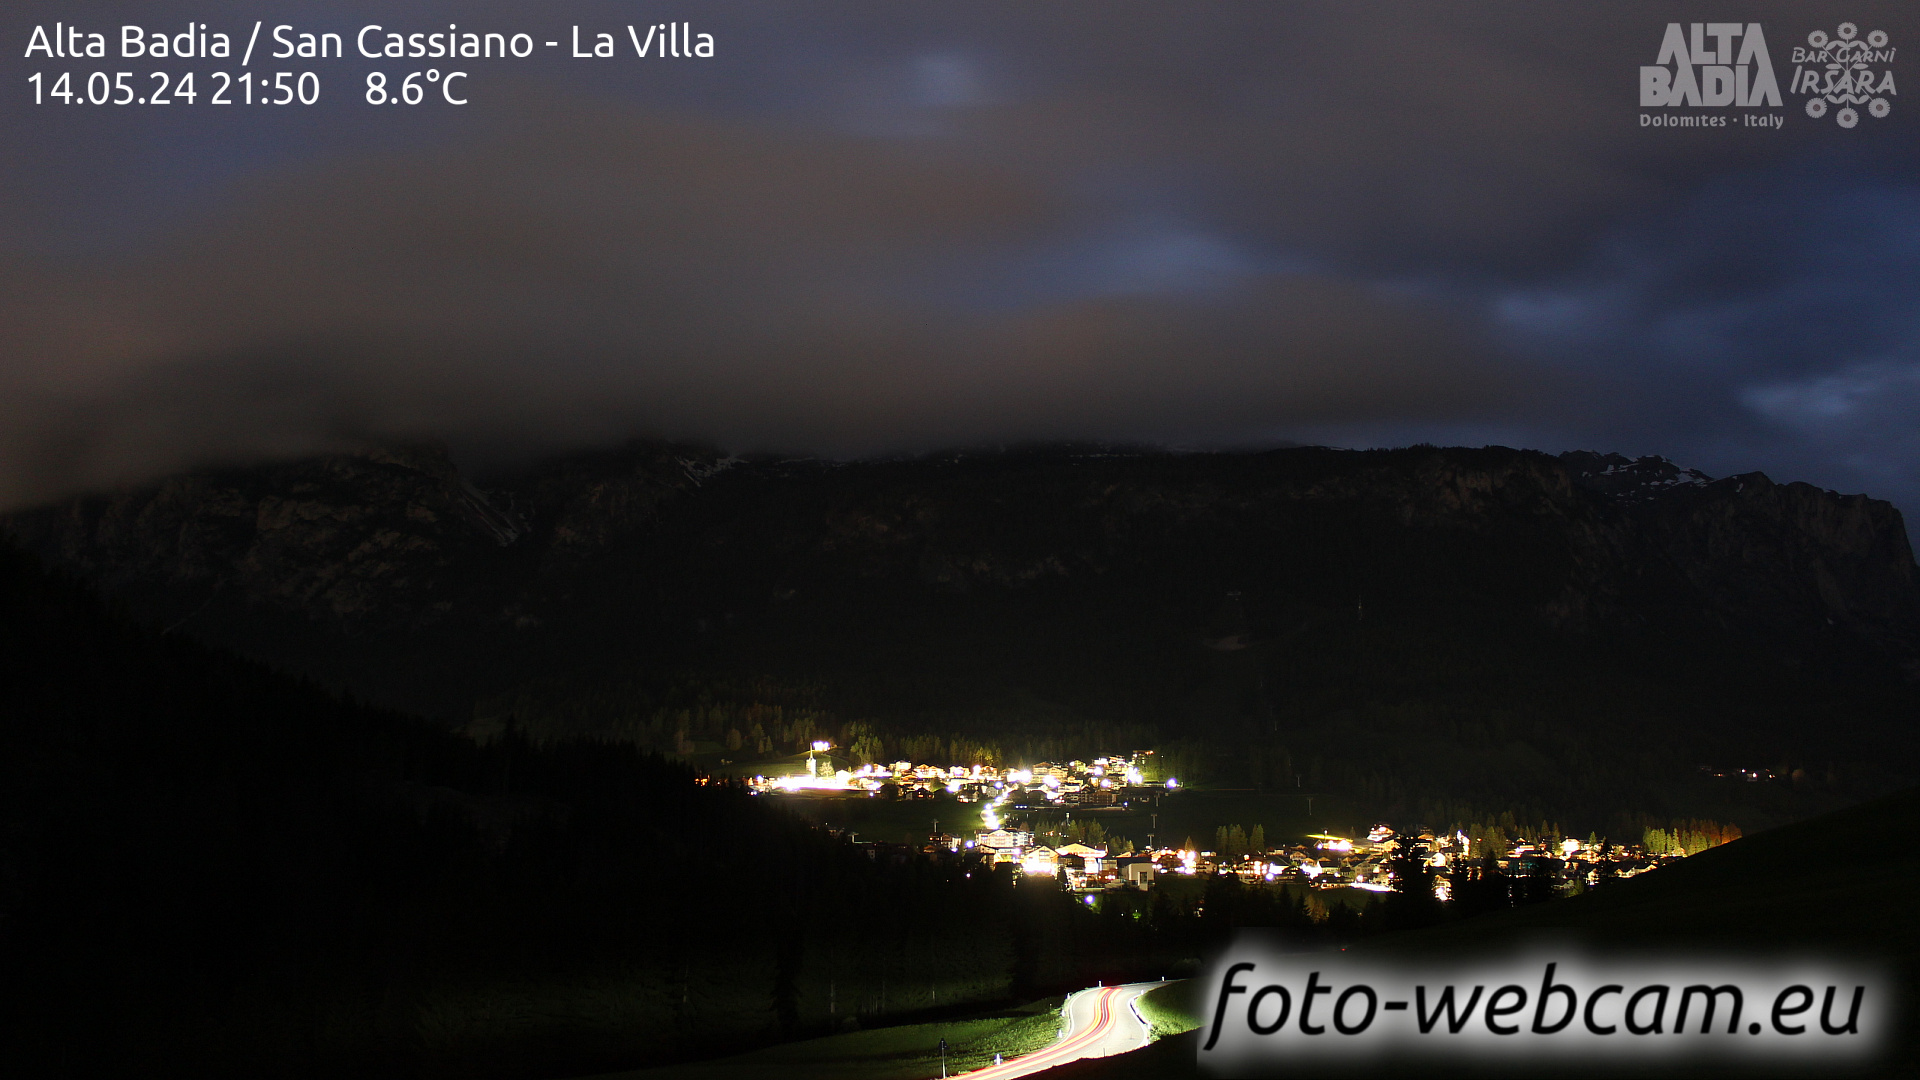 San Cassiano Wed. 22:00